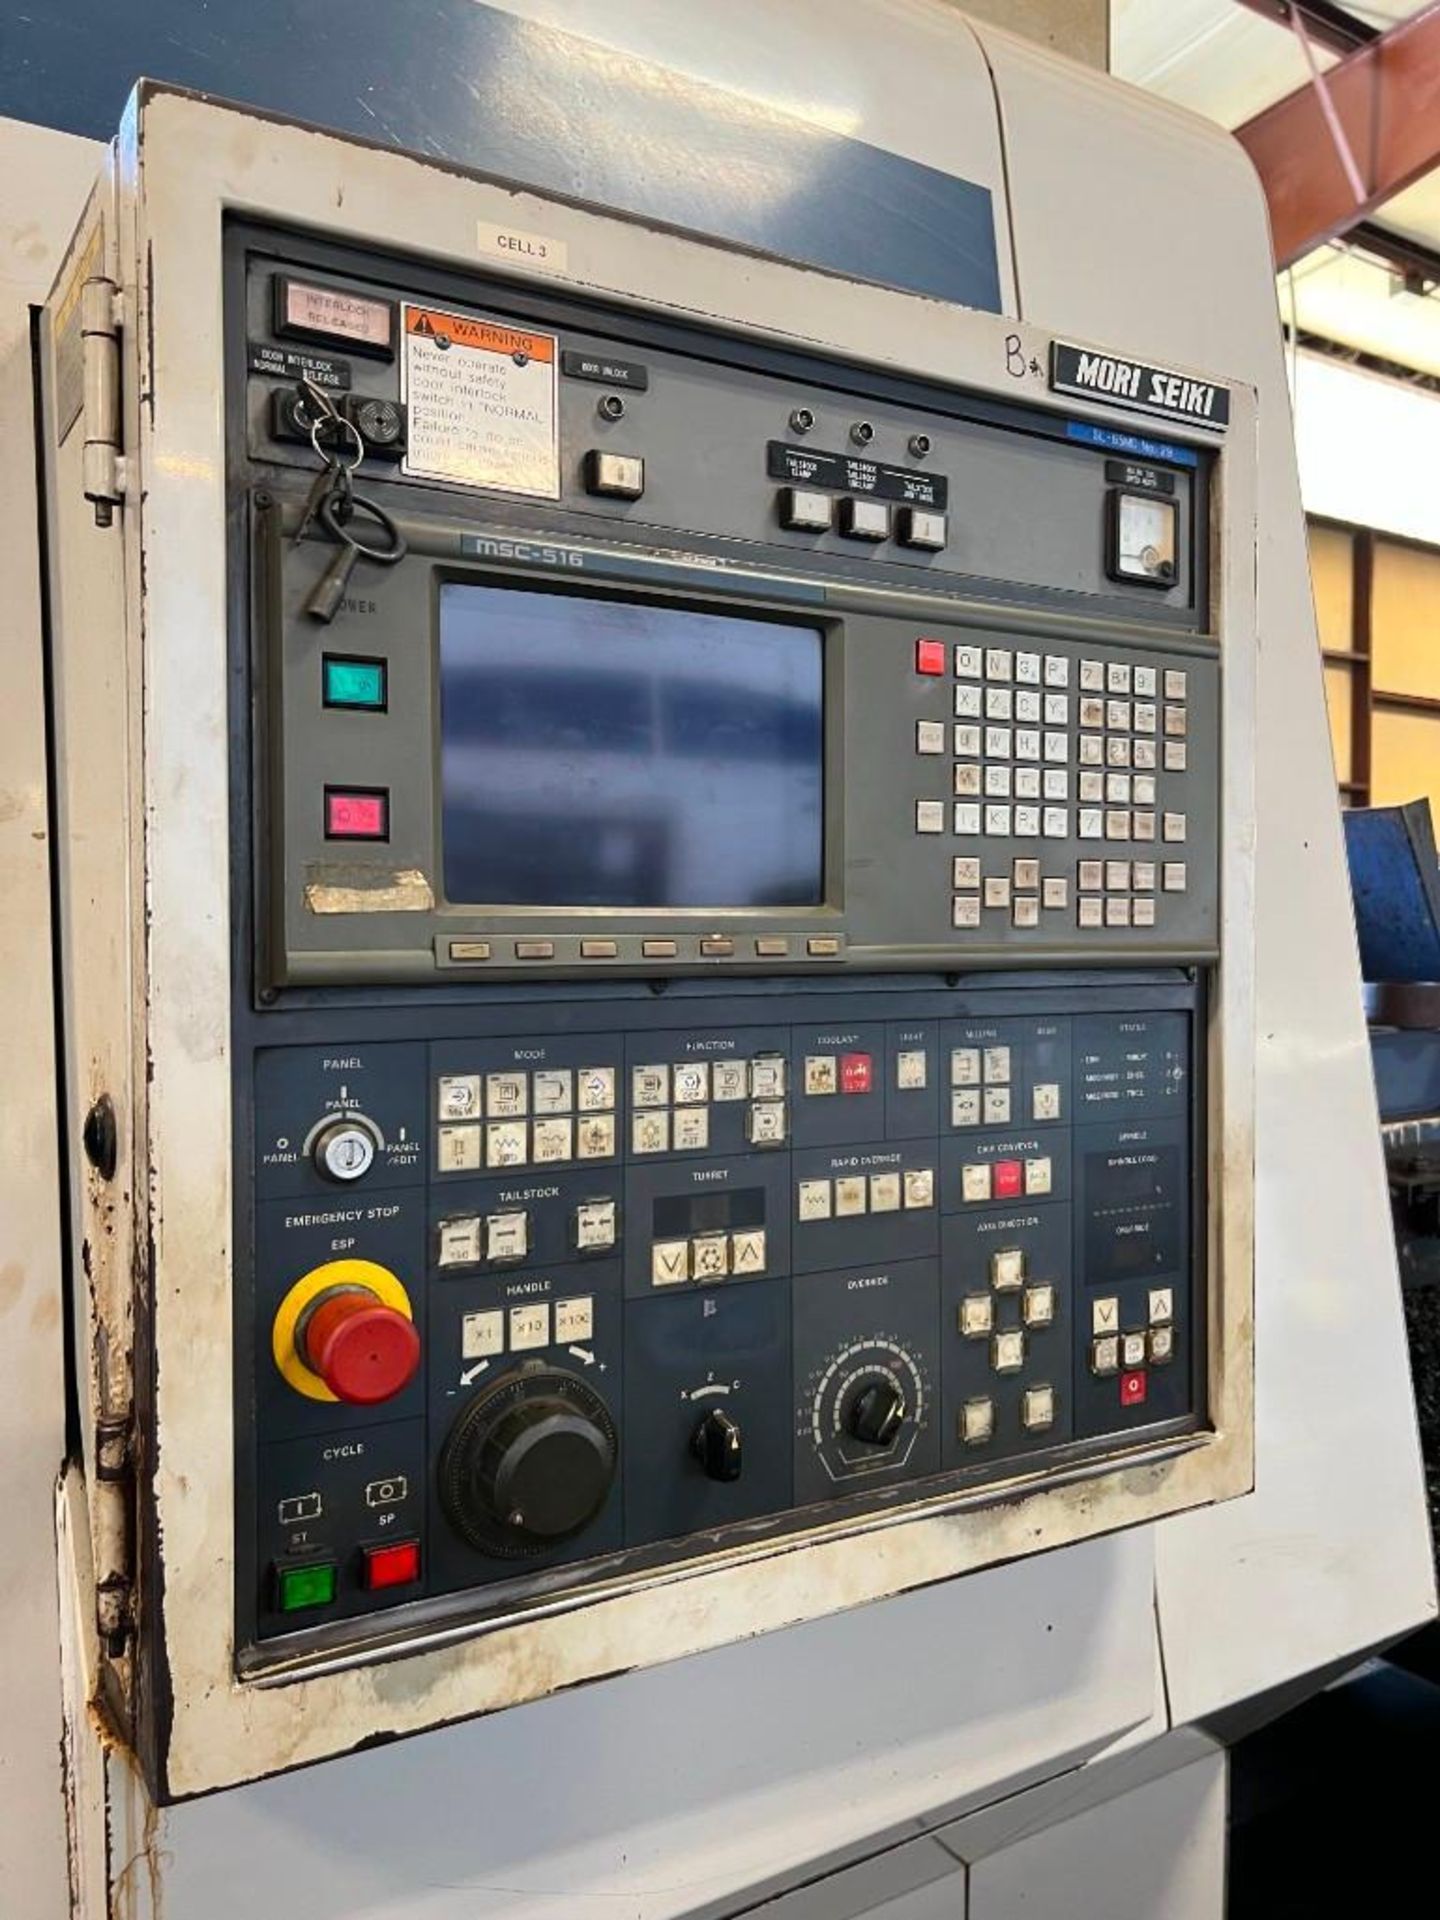 Mori Seiki SL-65 MC CNC Turn/Mill Center with 6.5" Spindle Bore - Image 2 of 8